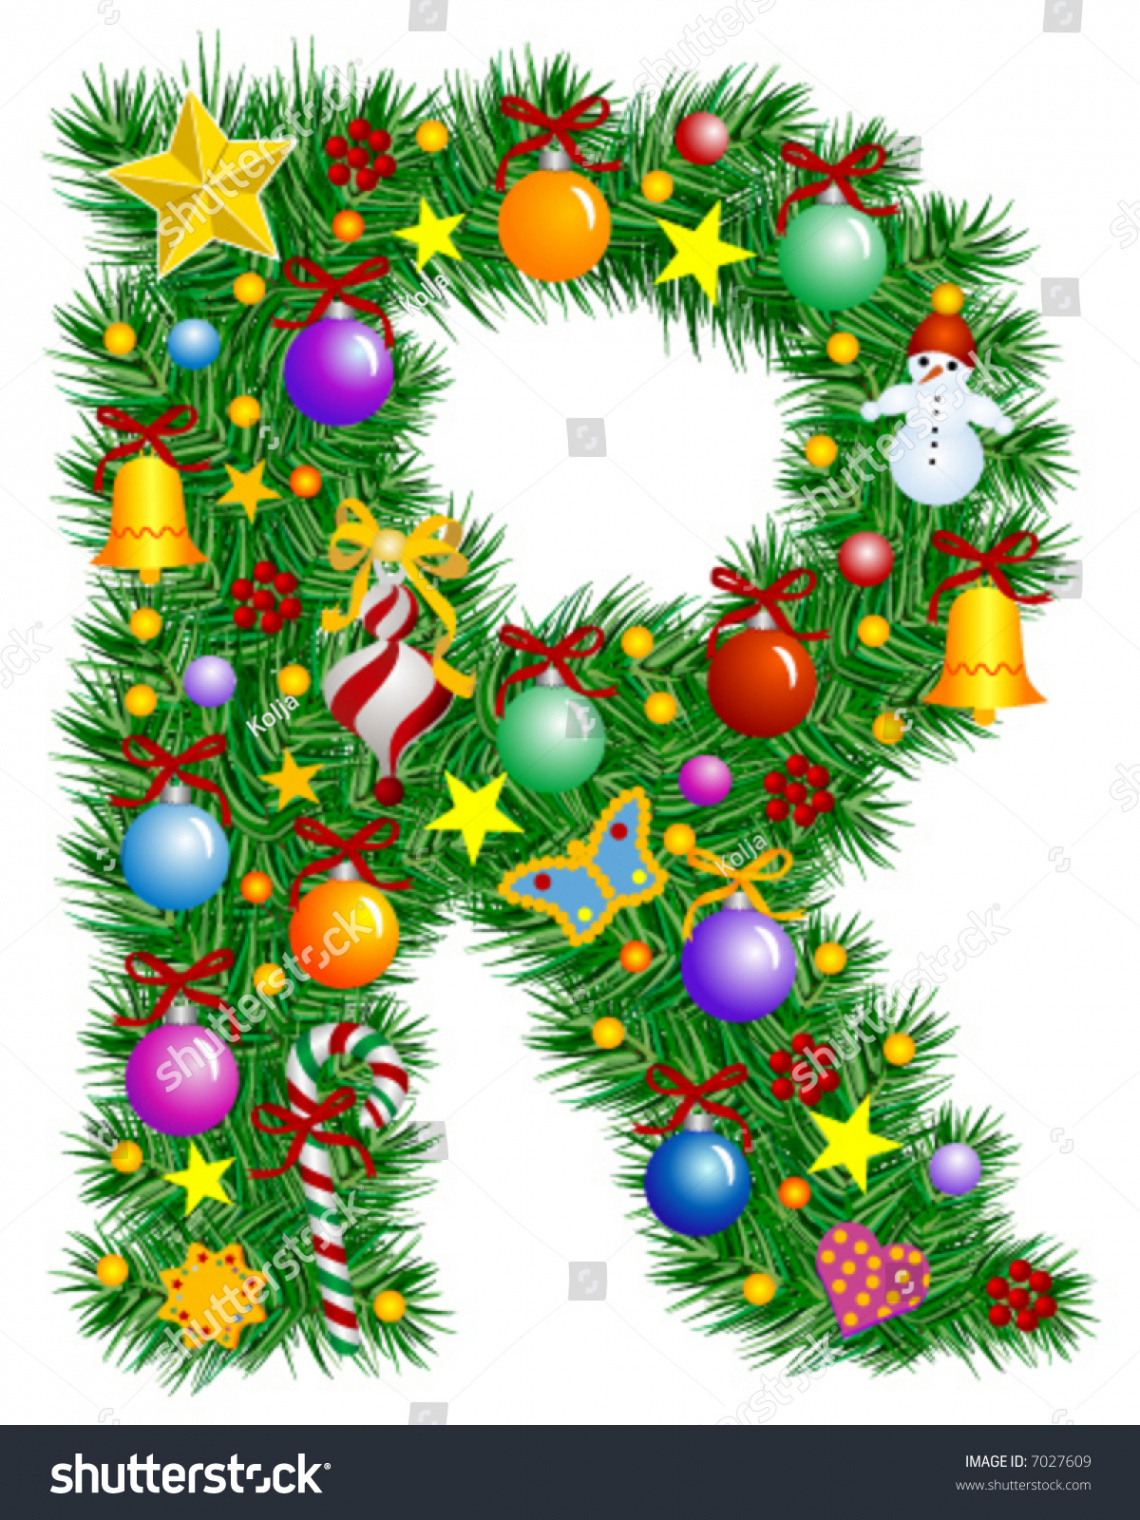 Letter R Christmas Tree Decoration Part Stock Vector (Royalty Free